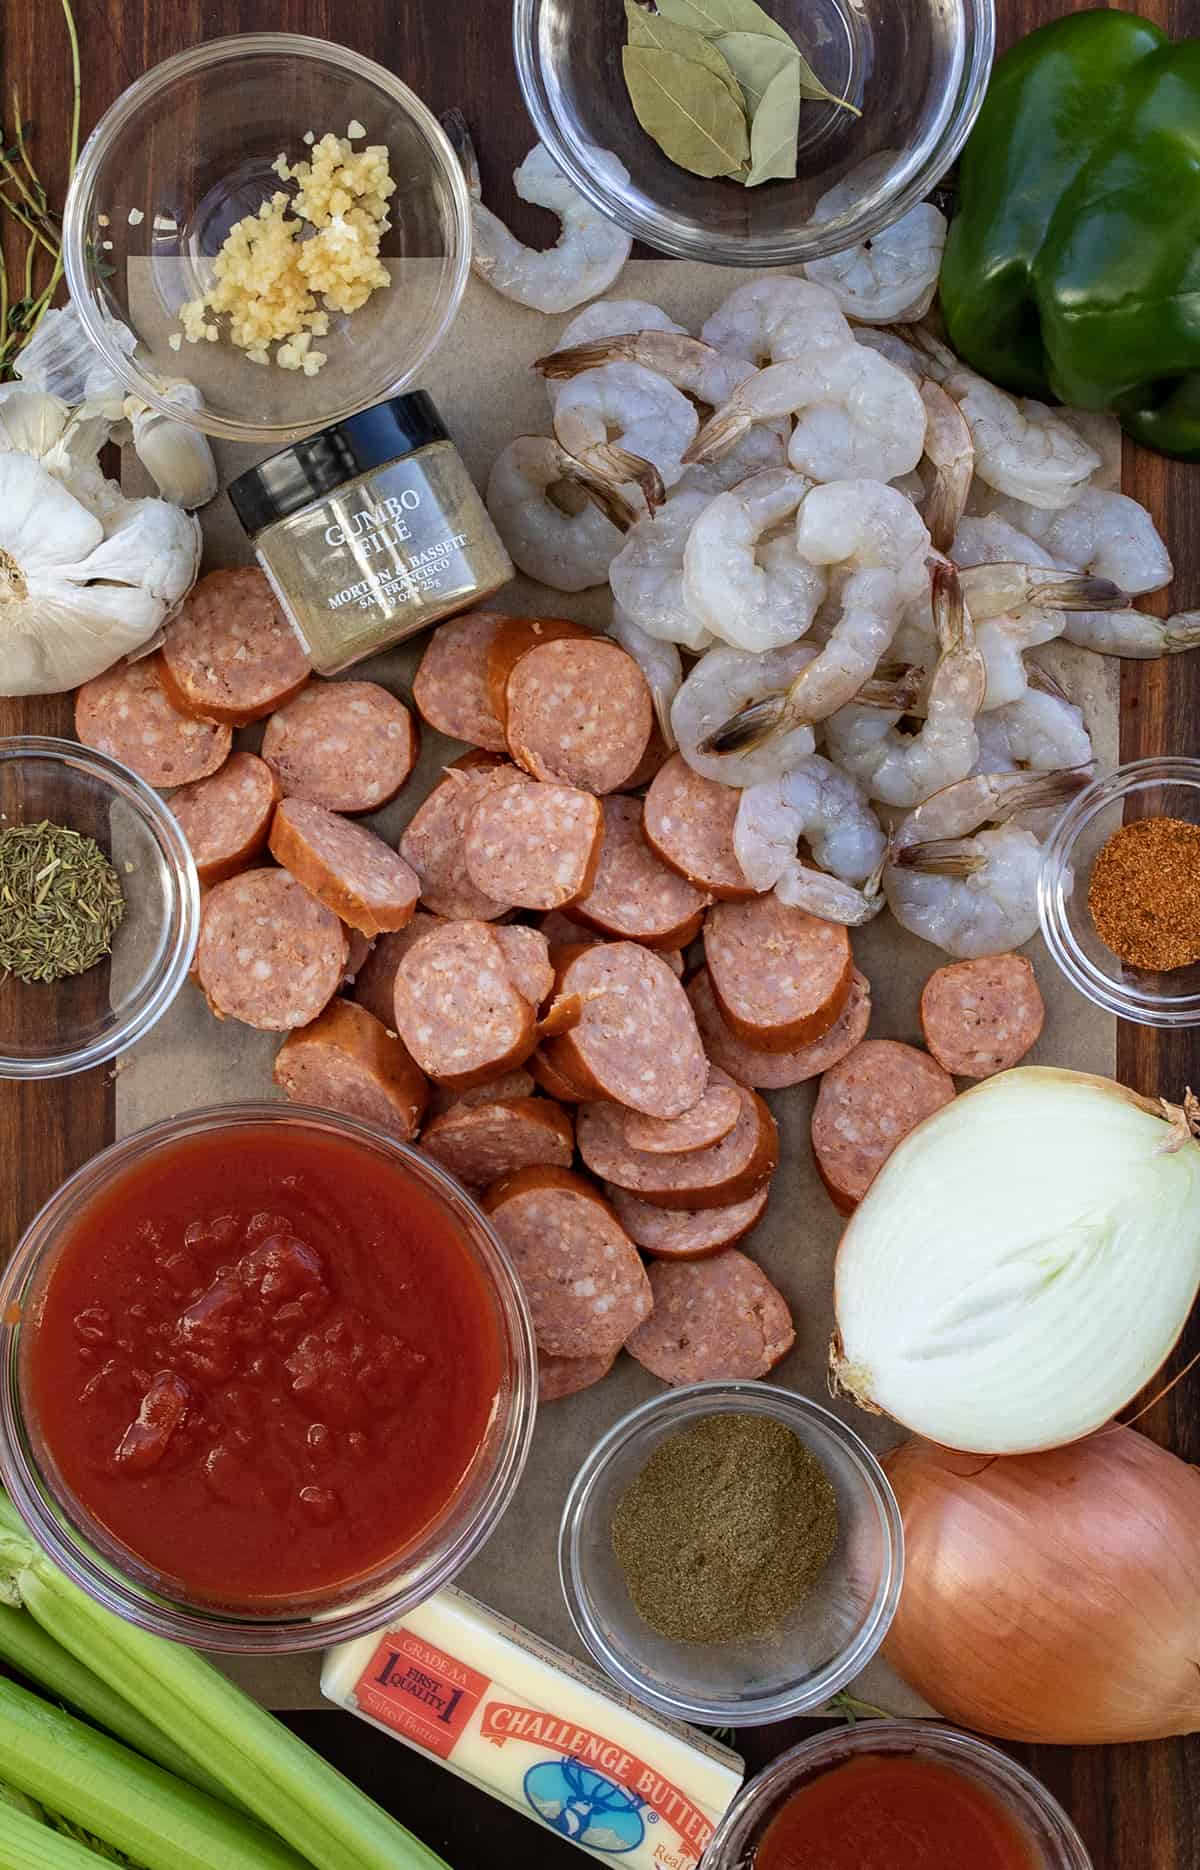 Raw Ingredients for Gumbo on a Cutting Board.